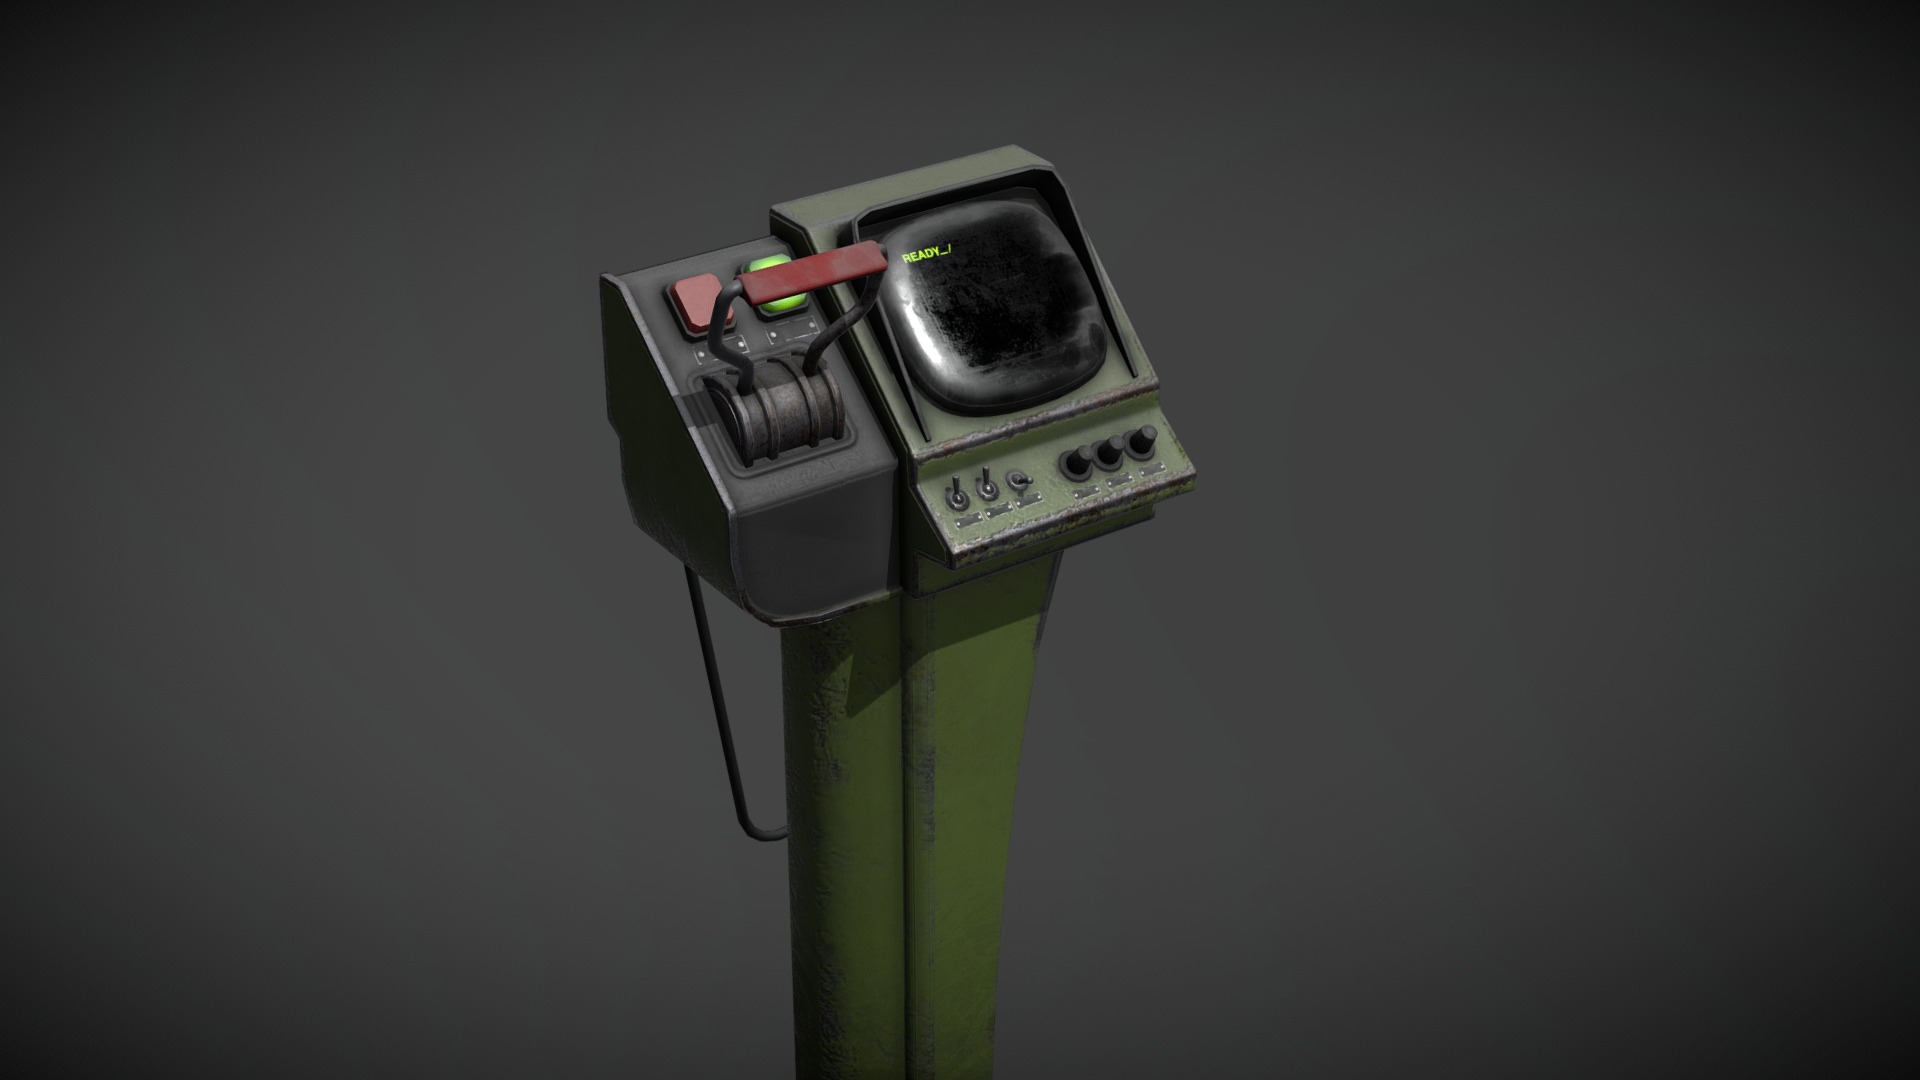 3D model Old terminal switch - This is a 3D model of the Old terminal switch. The 3D model is about a green and black electronic device.